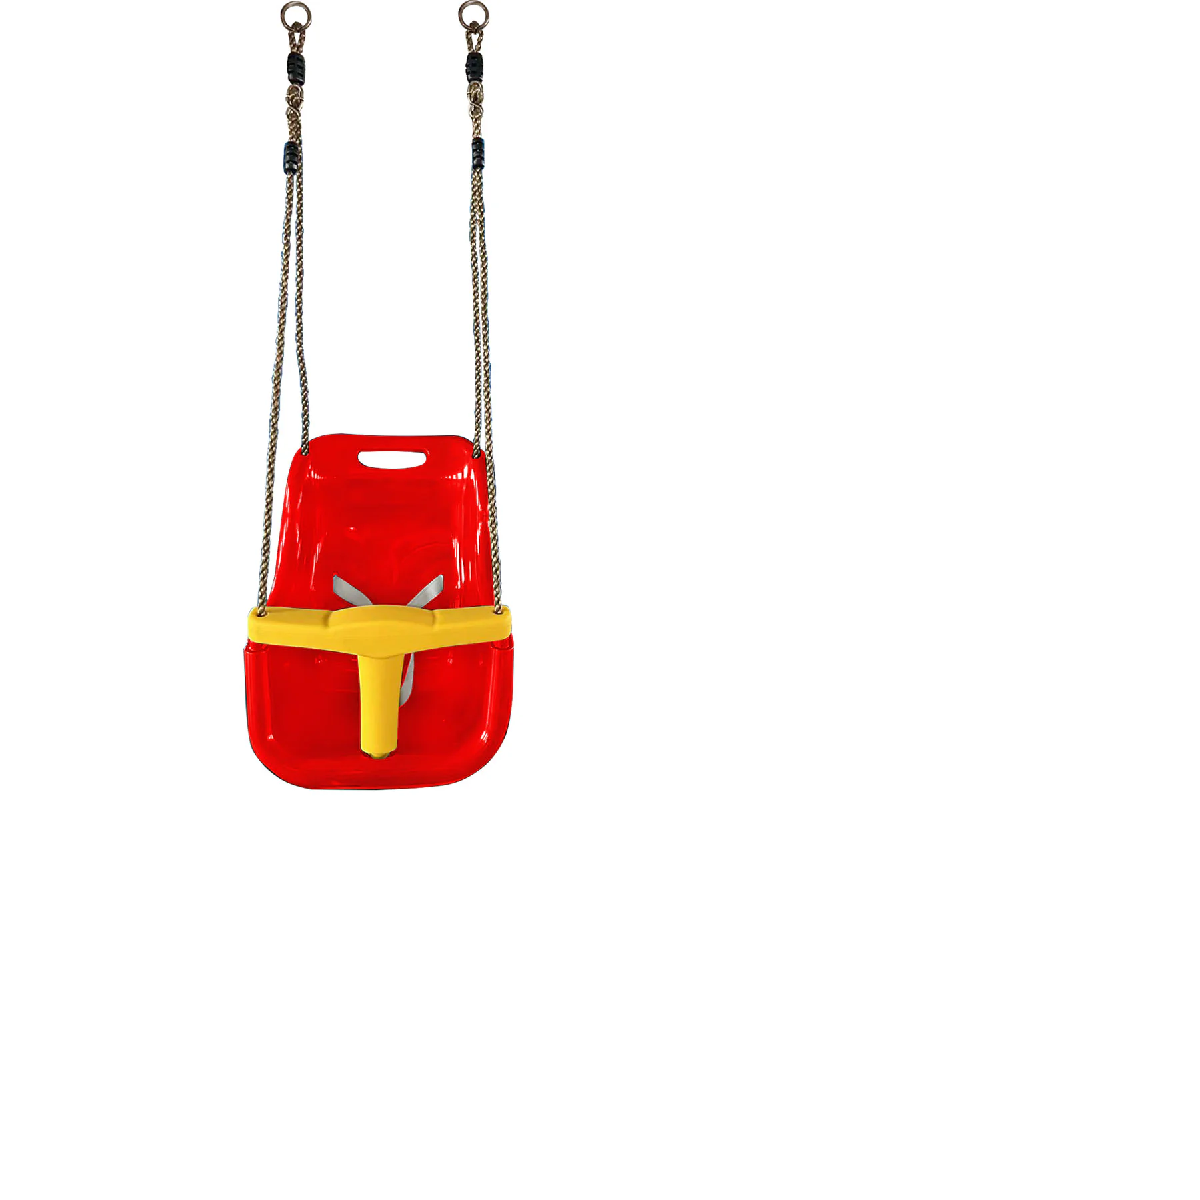 baby Swing Seat- Red & Yellow